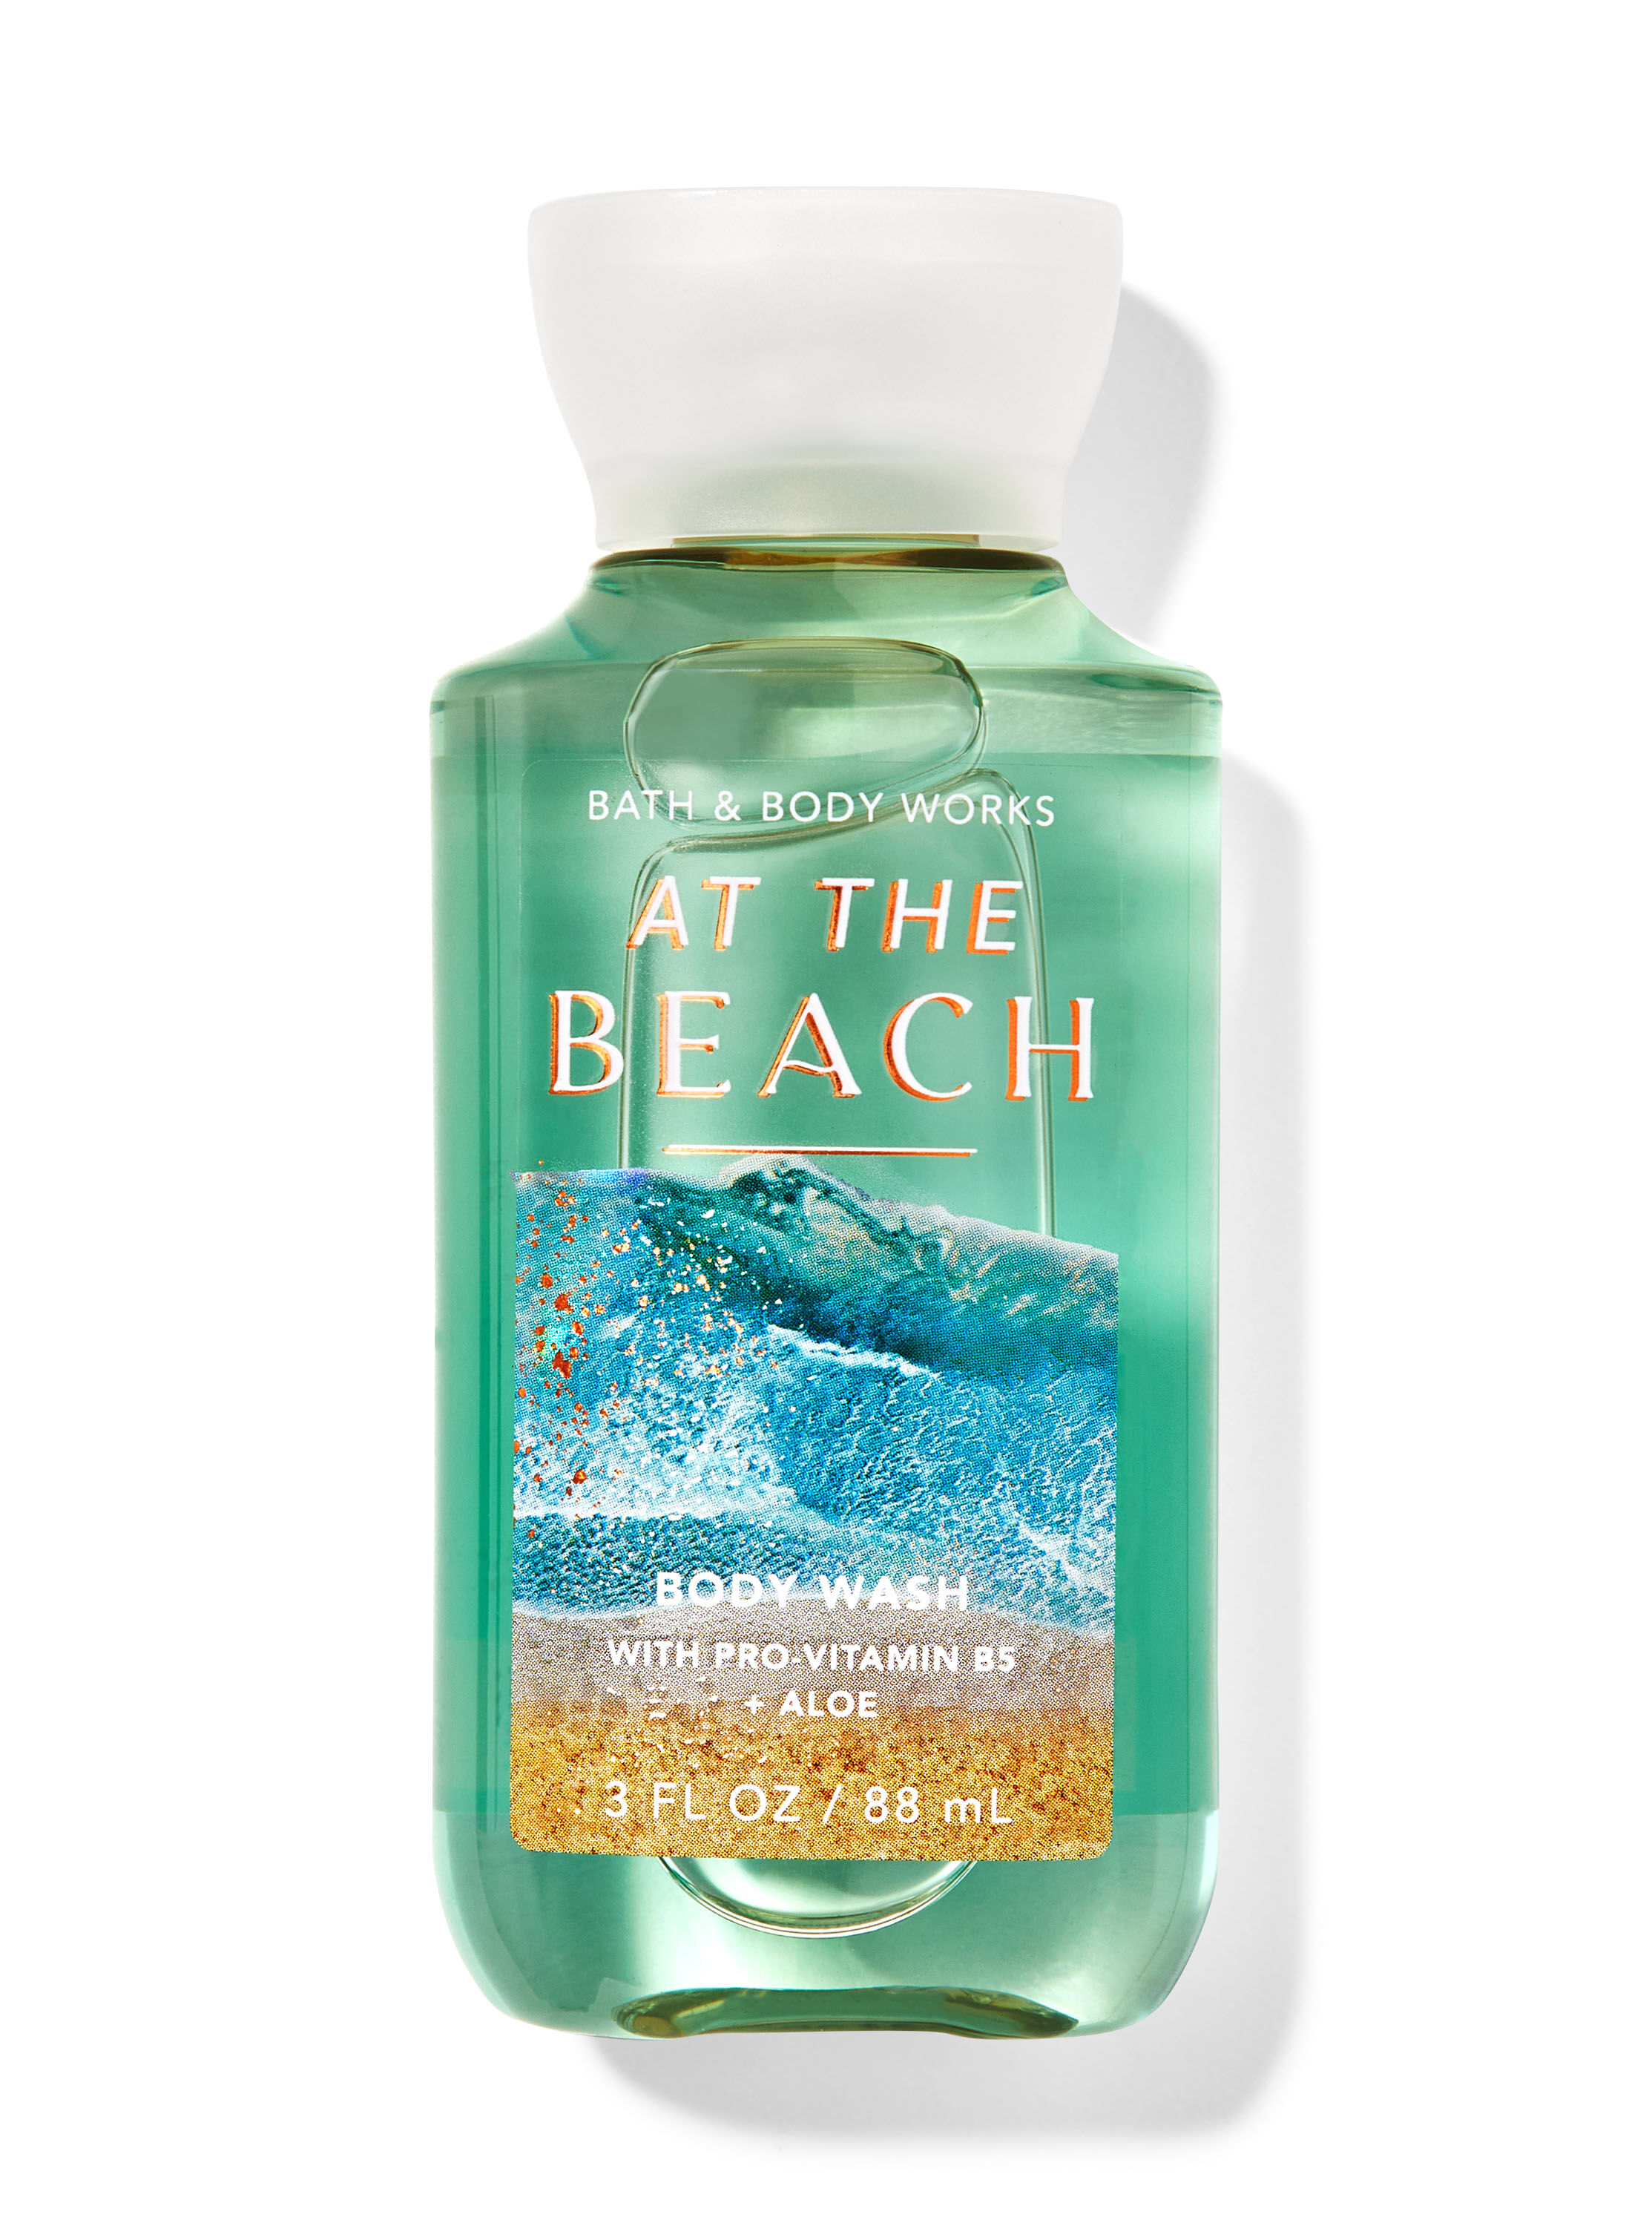 At the Beach Travel Size Body Wash